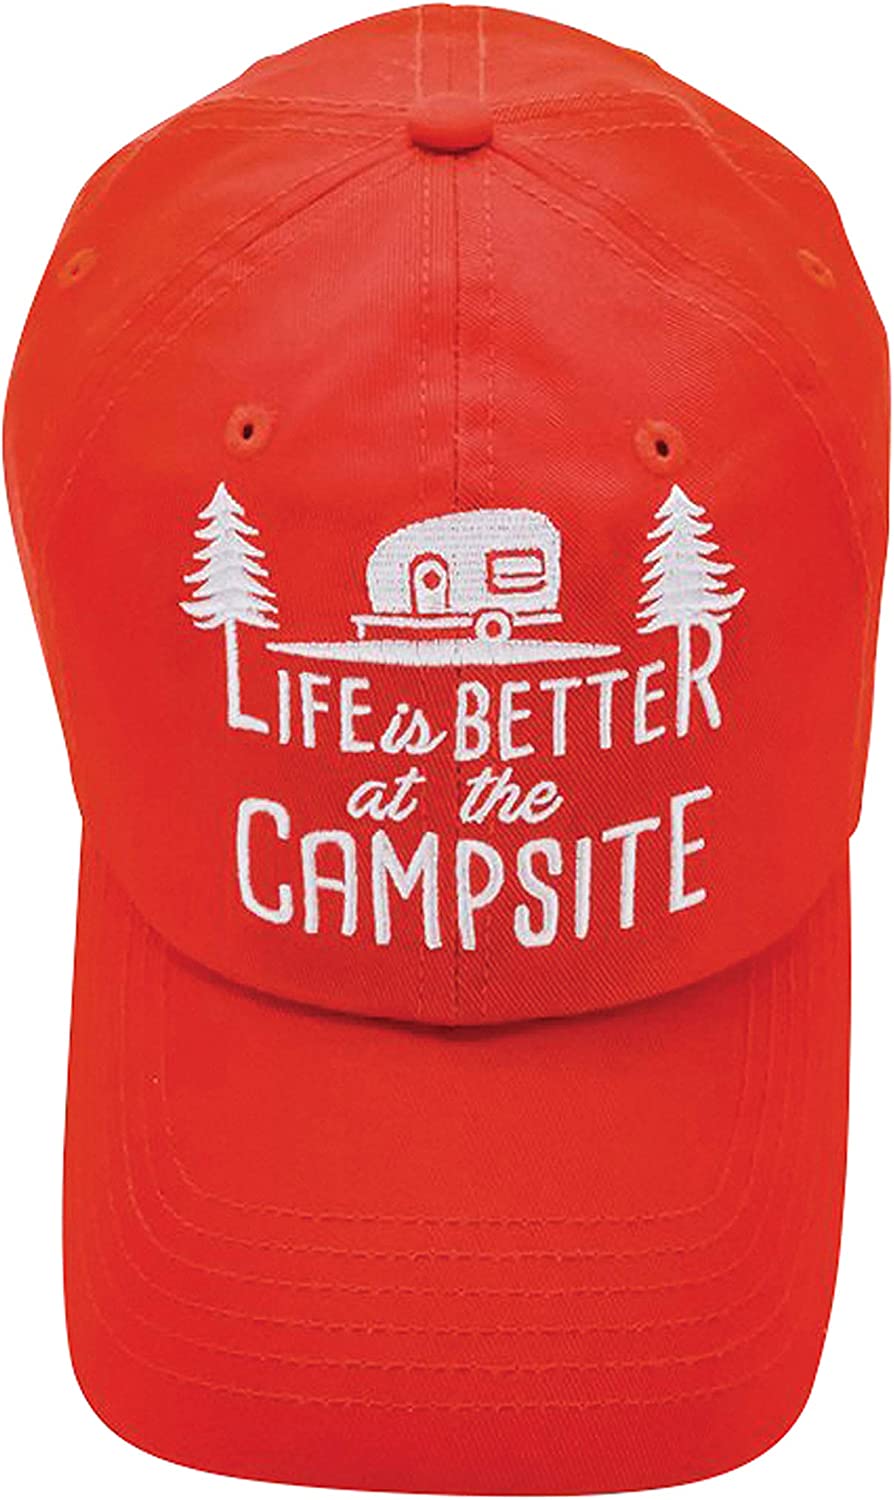 Camco Hat Red Life is better at the Campsite